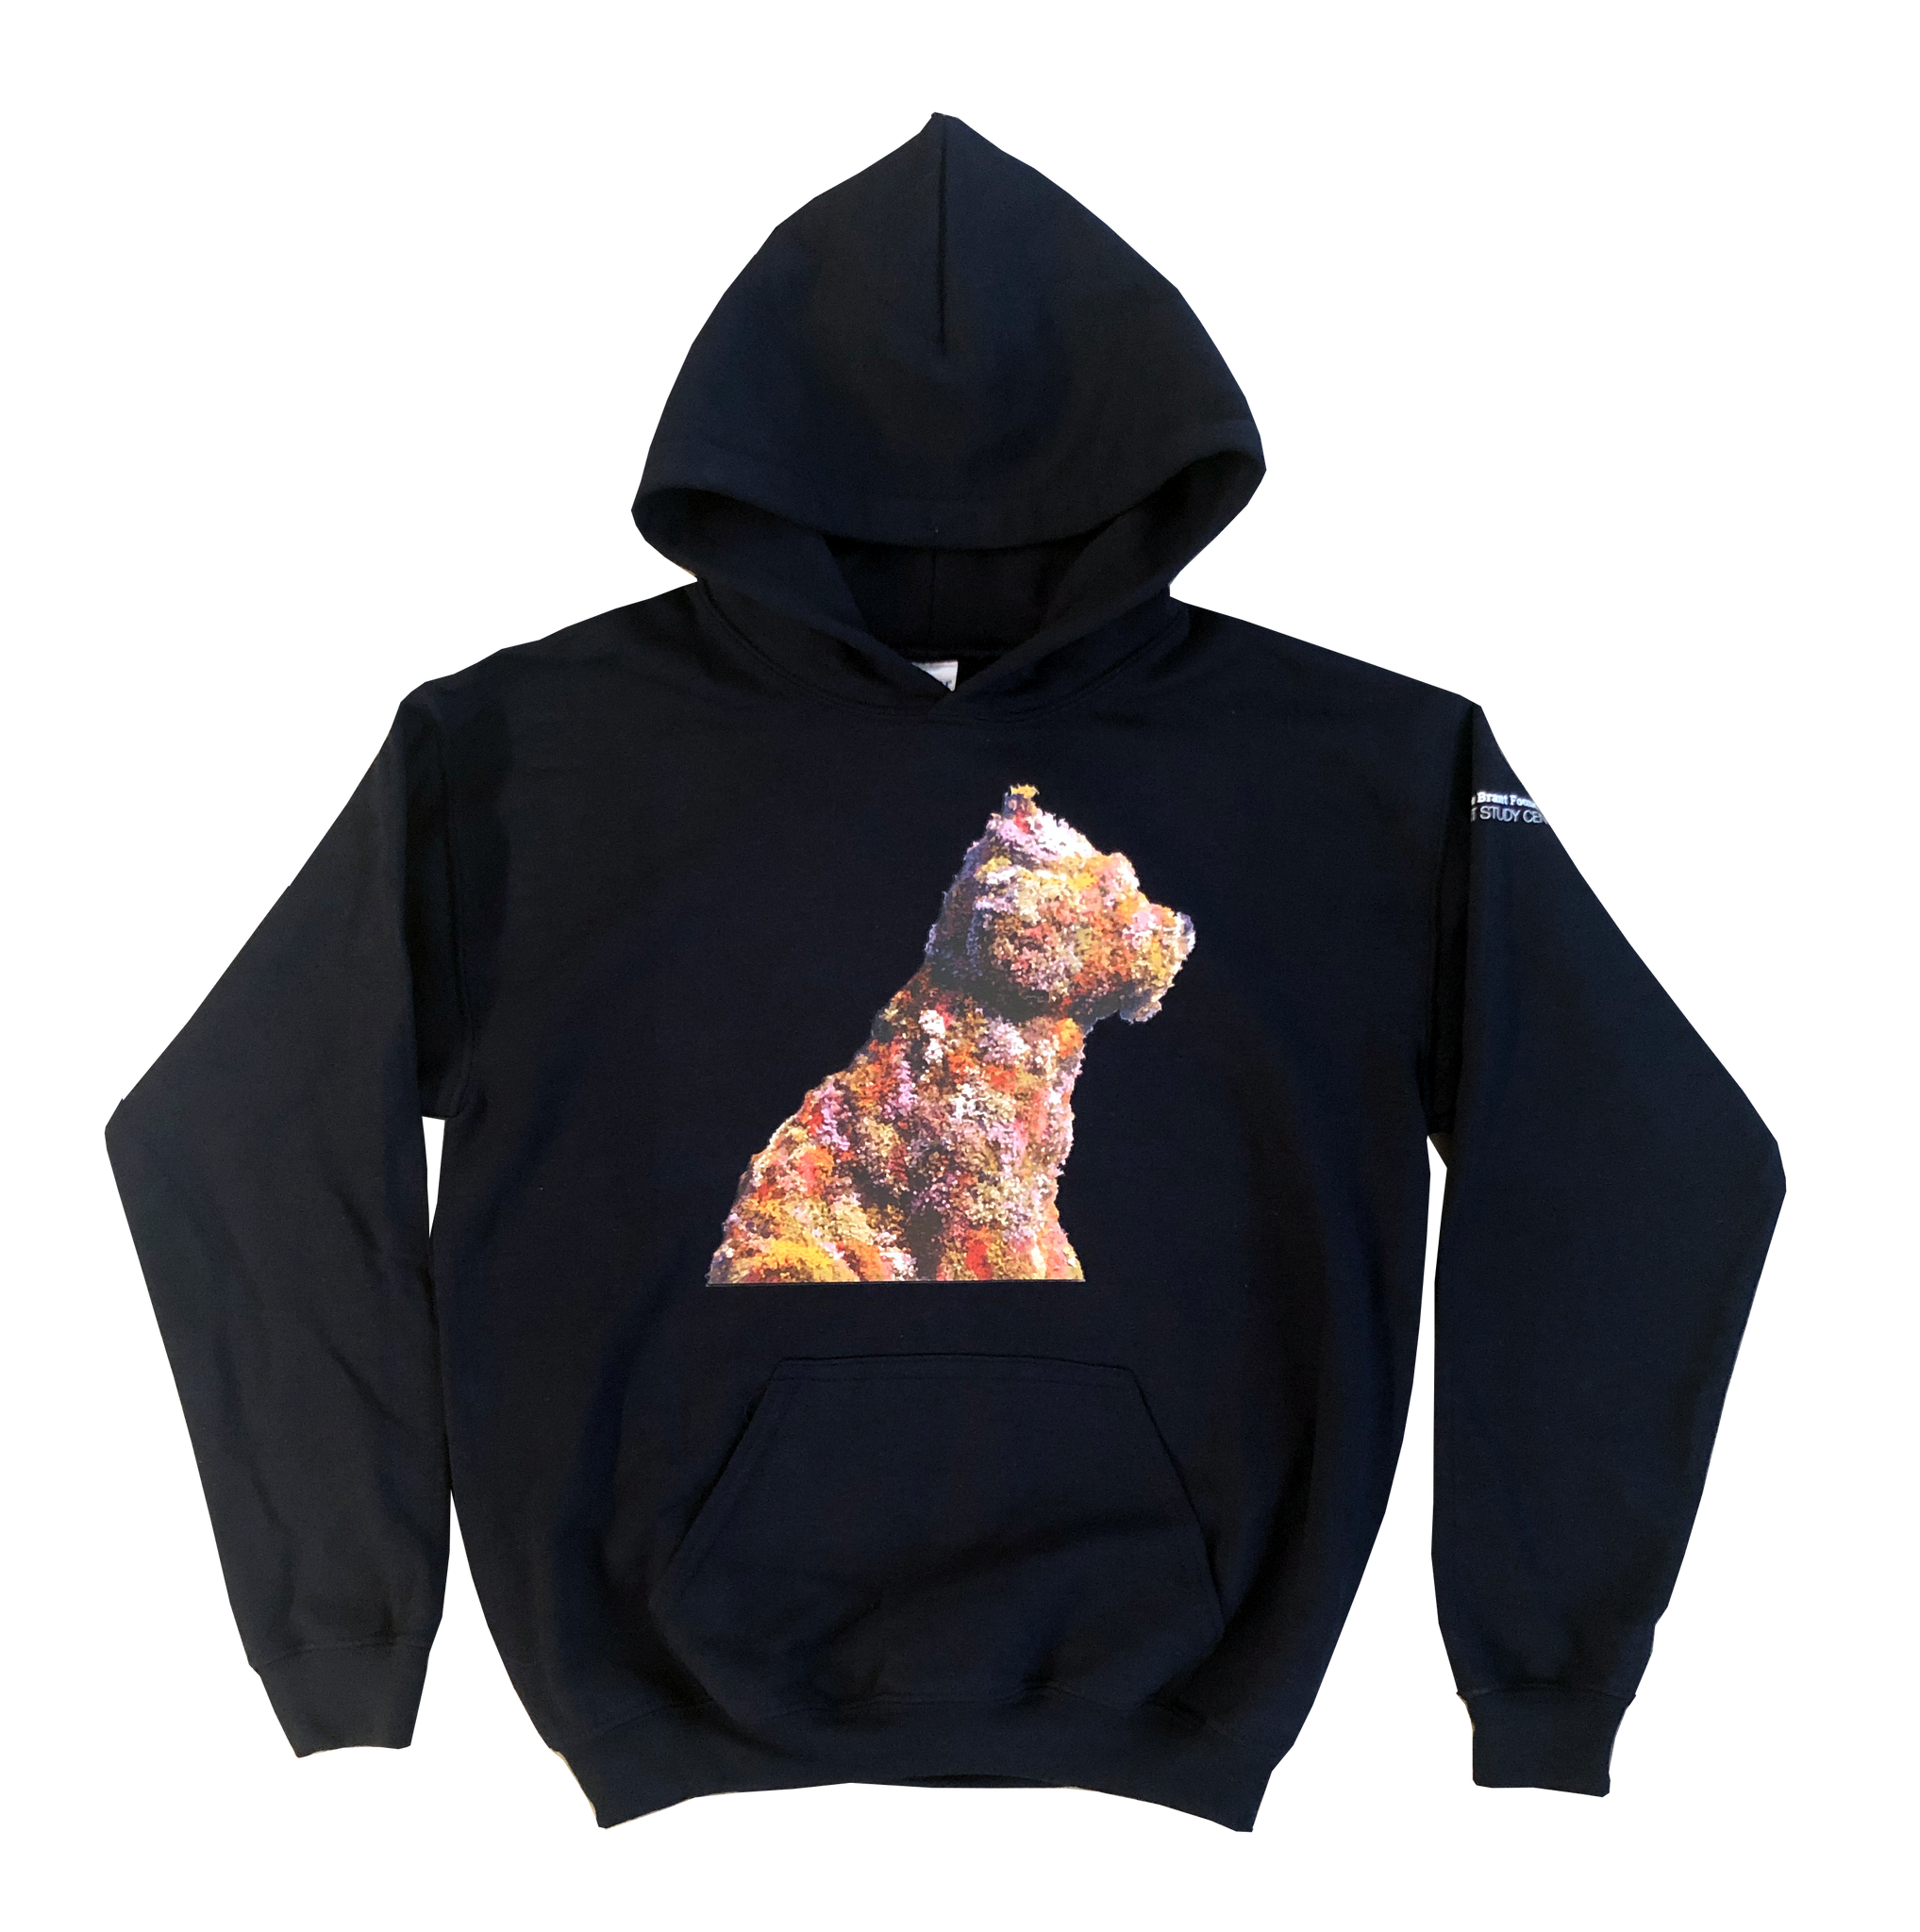 Jeff Koons Puppy Hoodie (Kids) - The Brant Foundation Shop